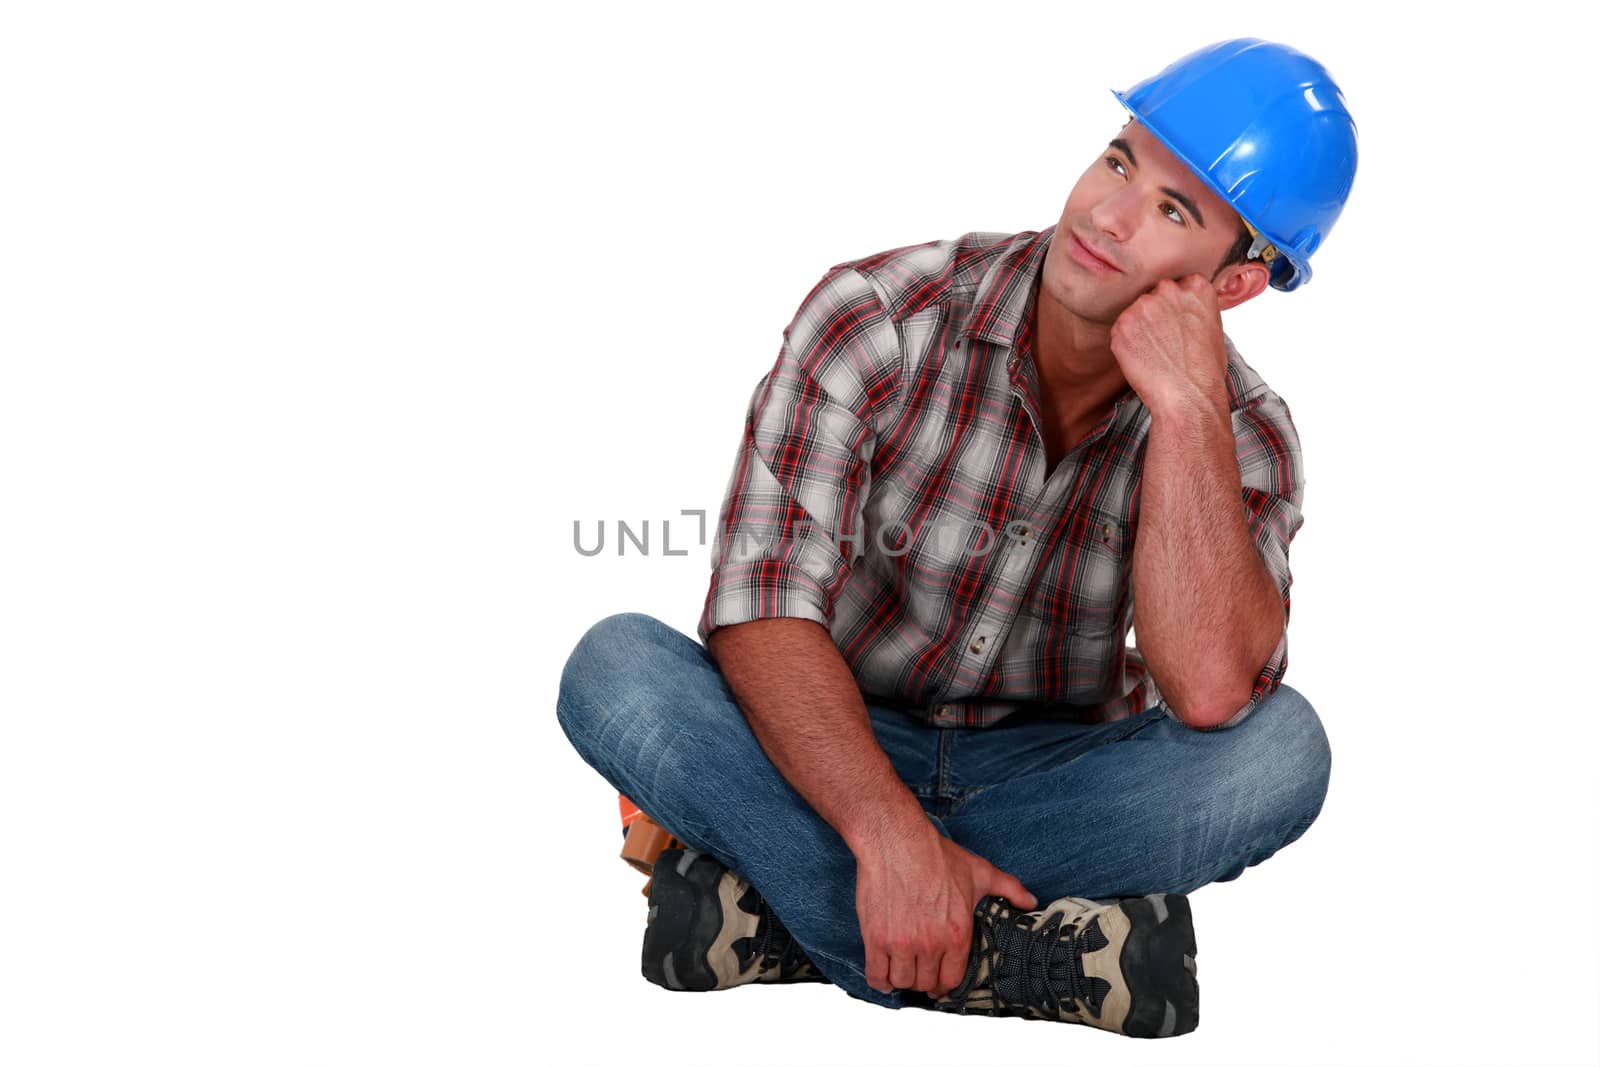 Daydreaming builder